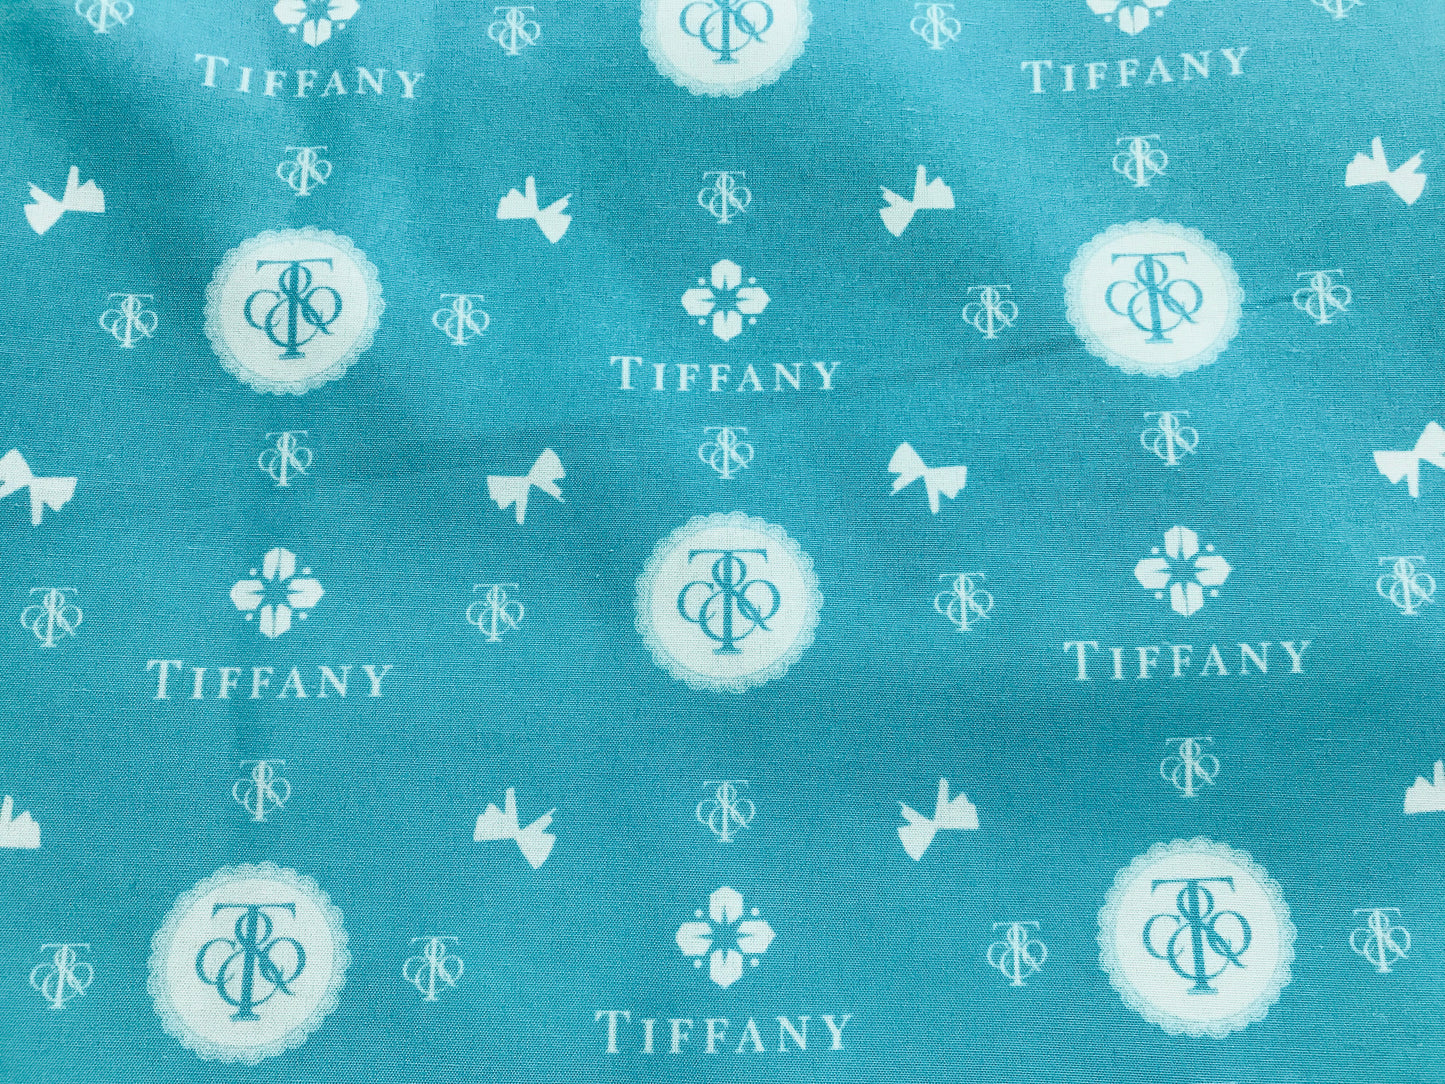 Tiffany & Co. Famous Bows Jewelry Designer Logo Printed Fabric